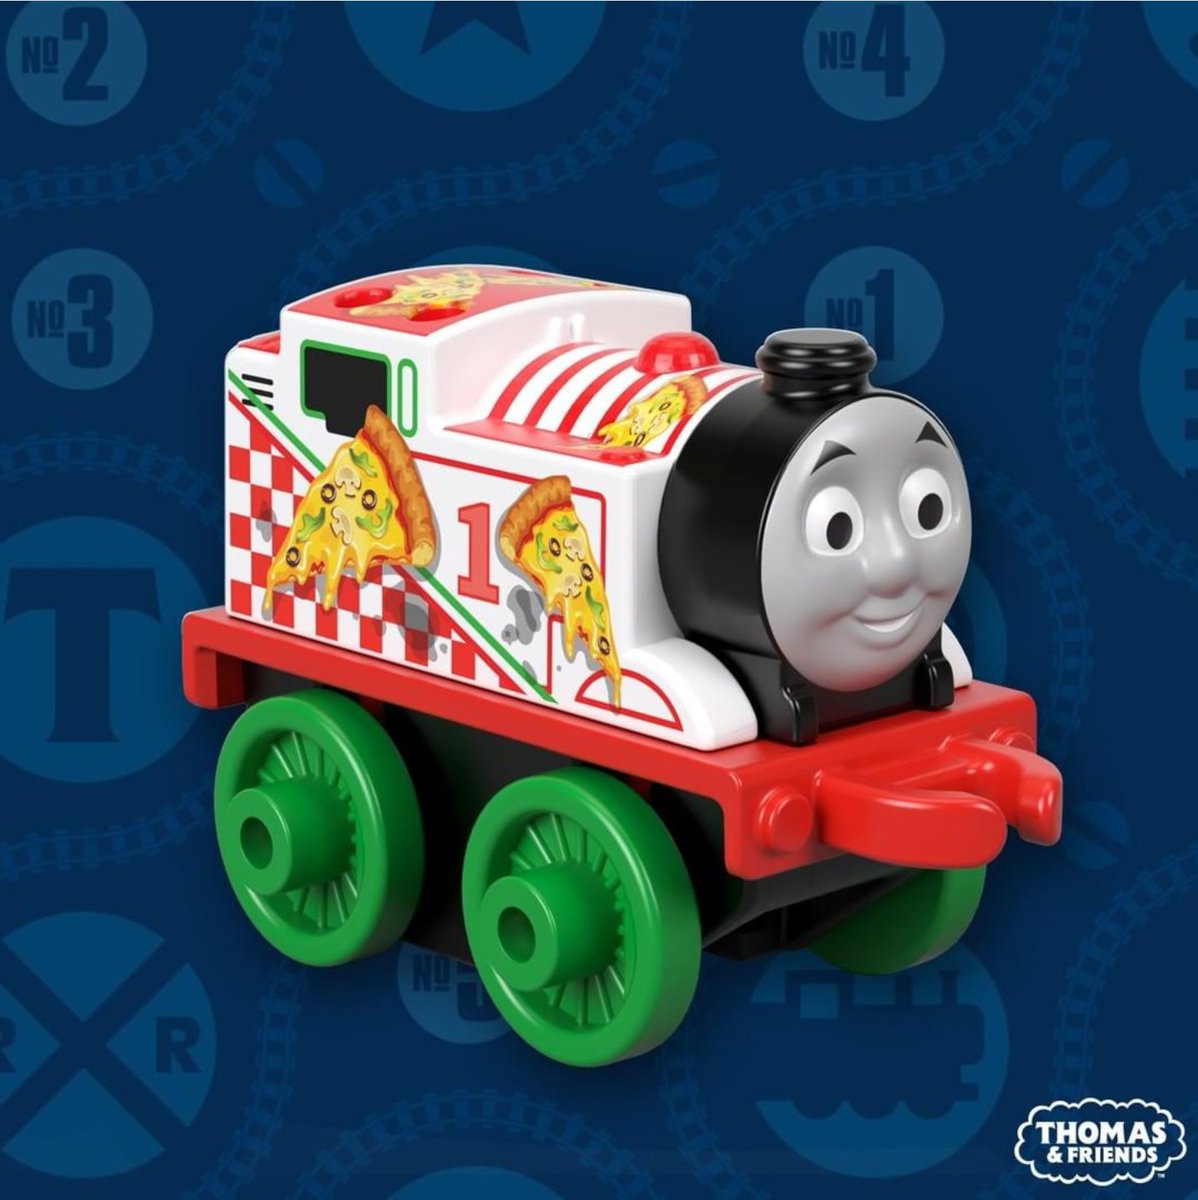 Thomas And Friends Minis 2019 List